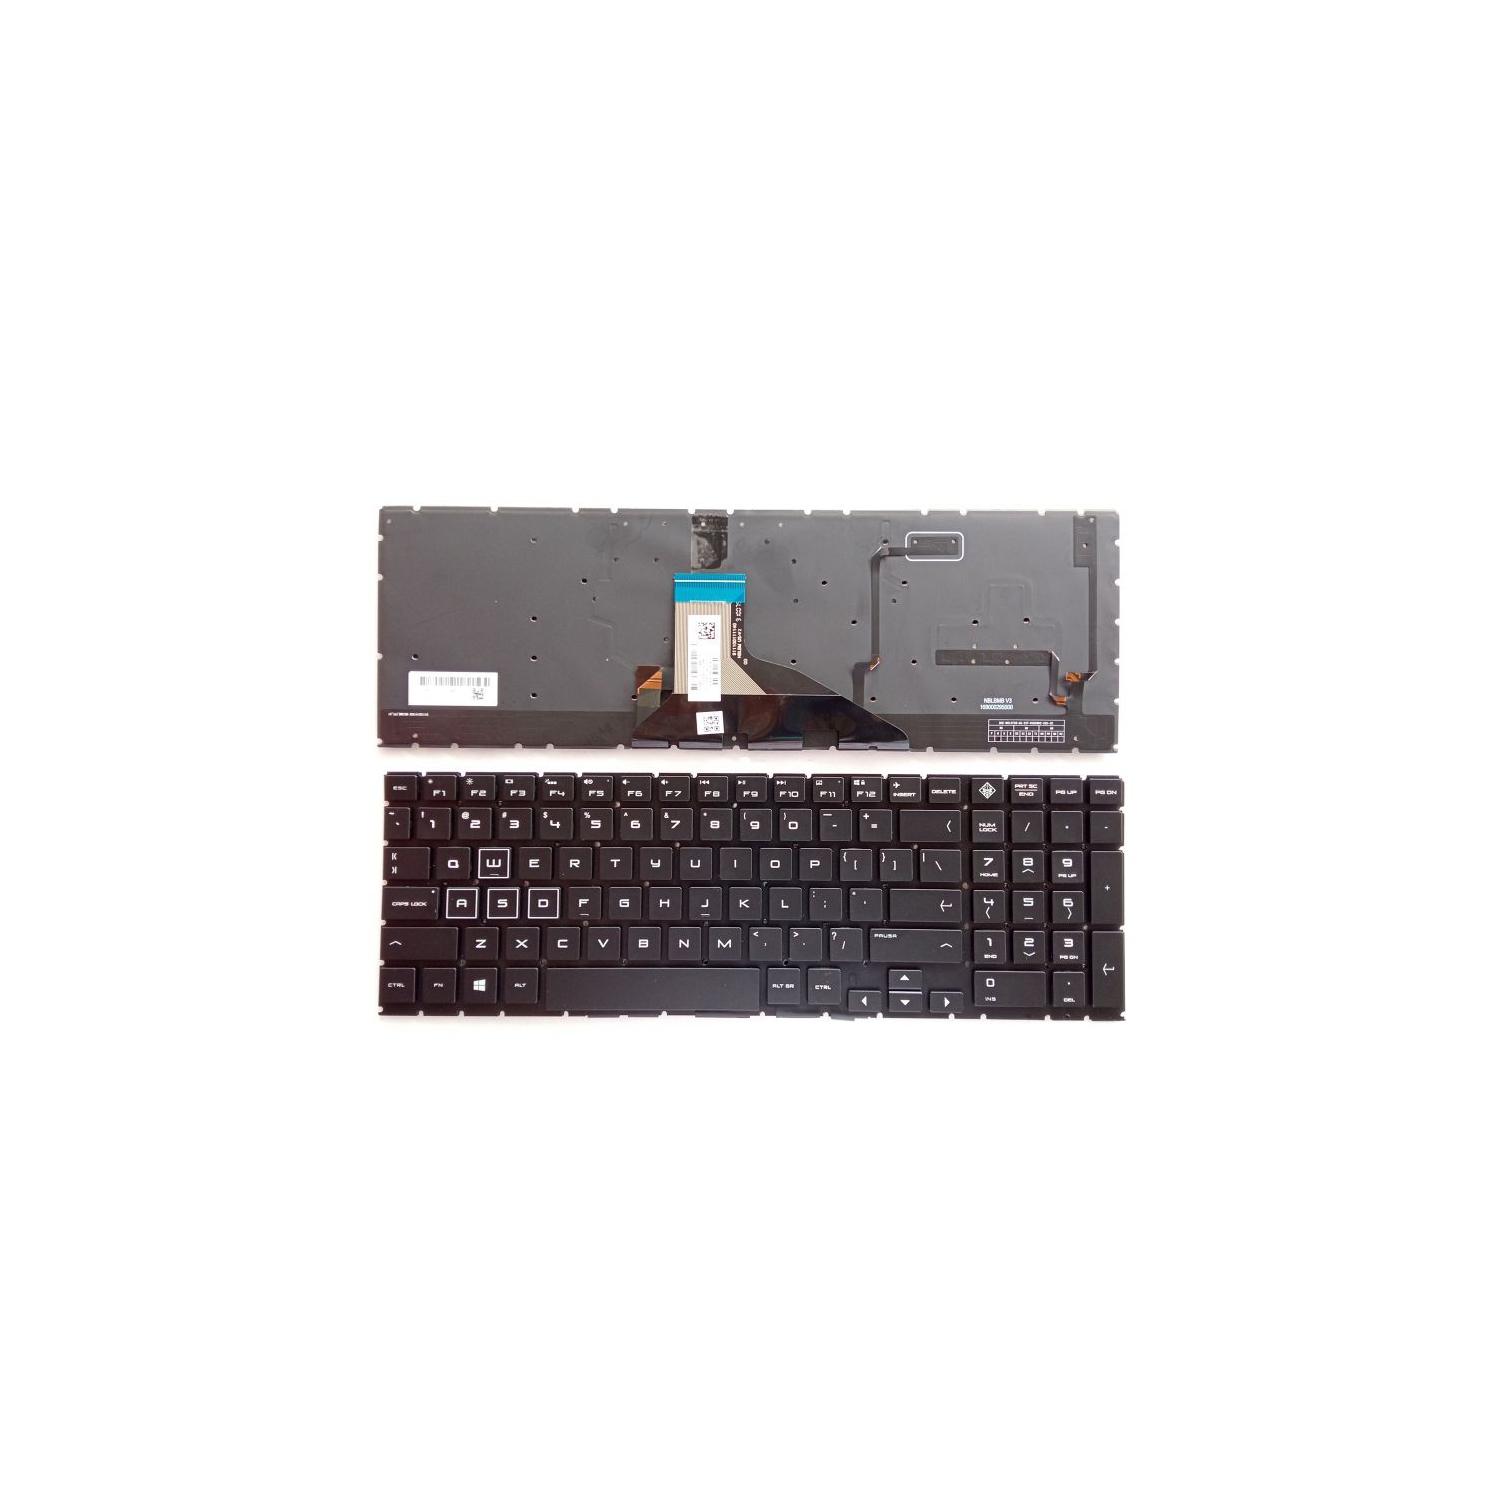 Replacement Laptop Keyboard RGB Backlit for HP Omen 15-DC 15T-DC 15-DH 15T-DH 15-DC0051NR 15T-DC000 15-DC0010CA 15-DC0010NR 15-DC0011NR 15-DC0020CA 15-DC0020NR